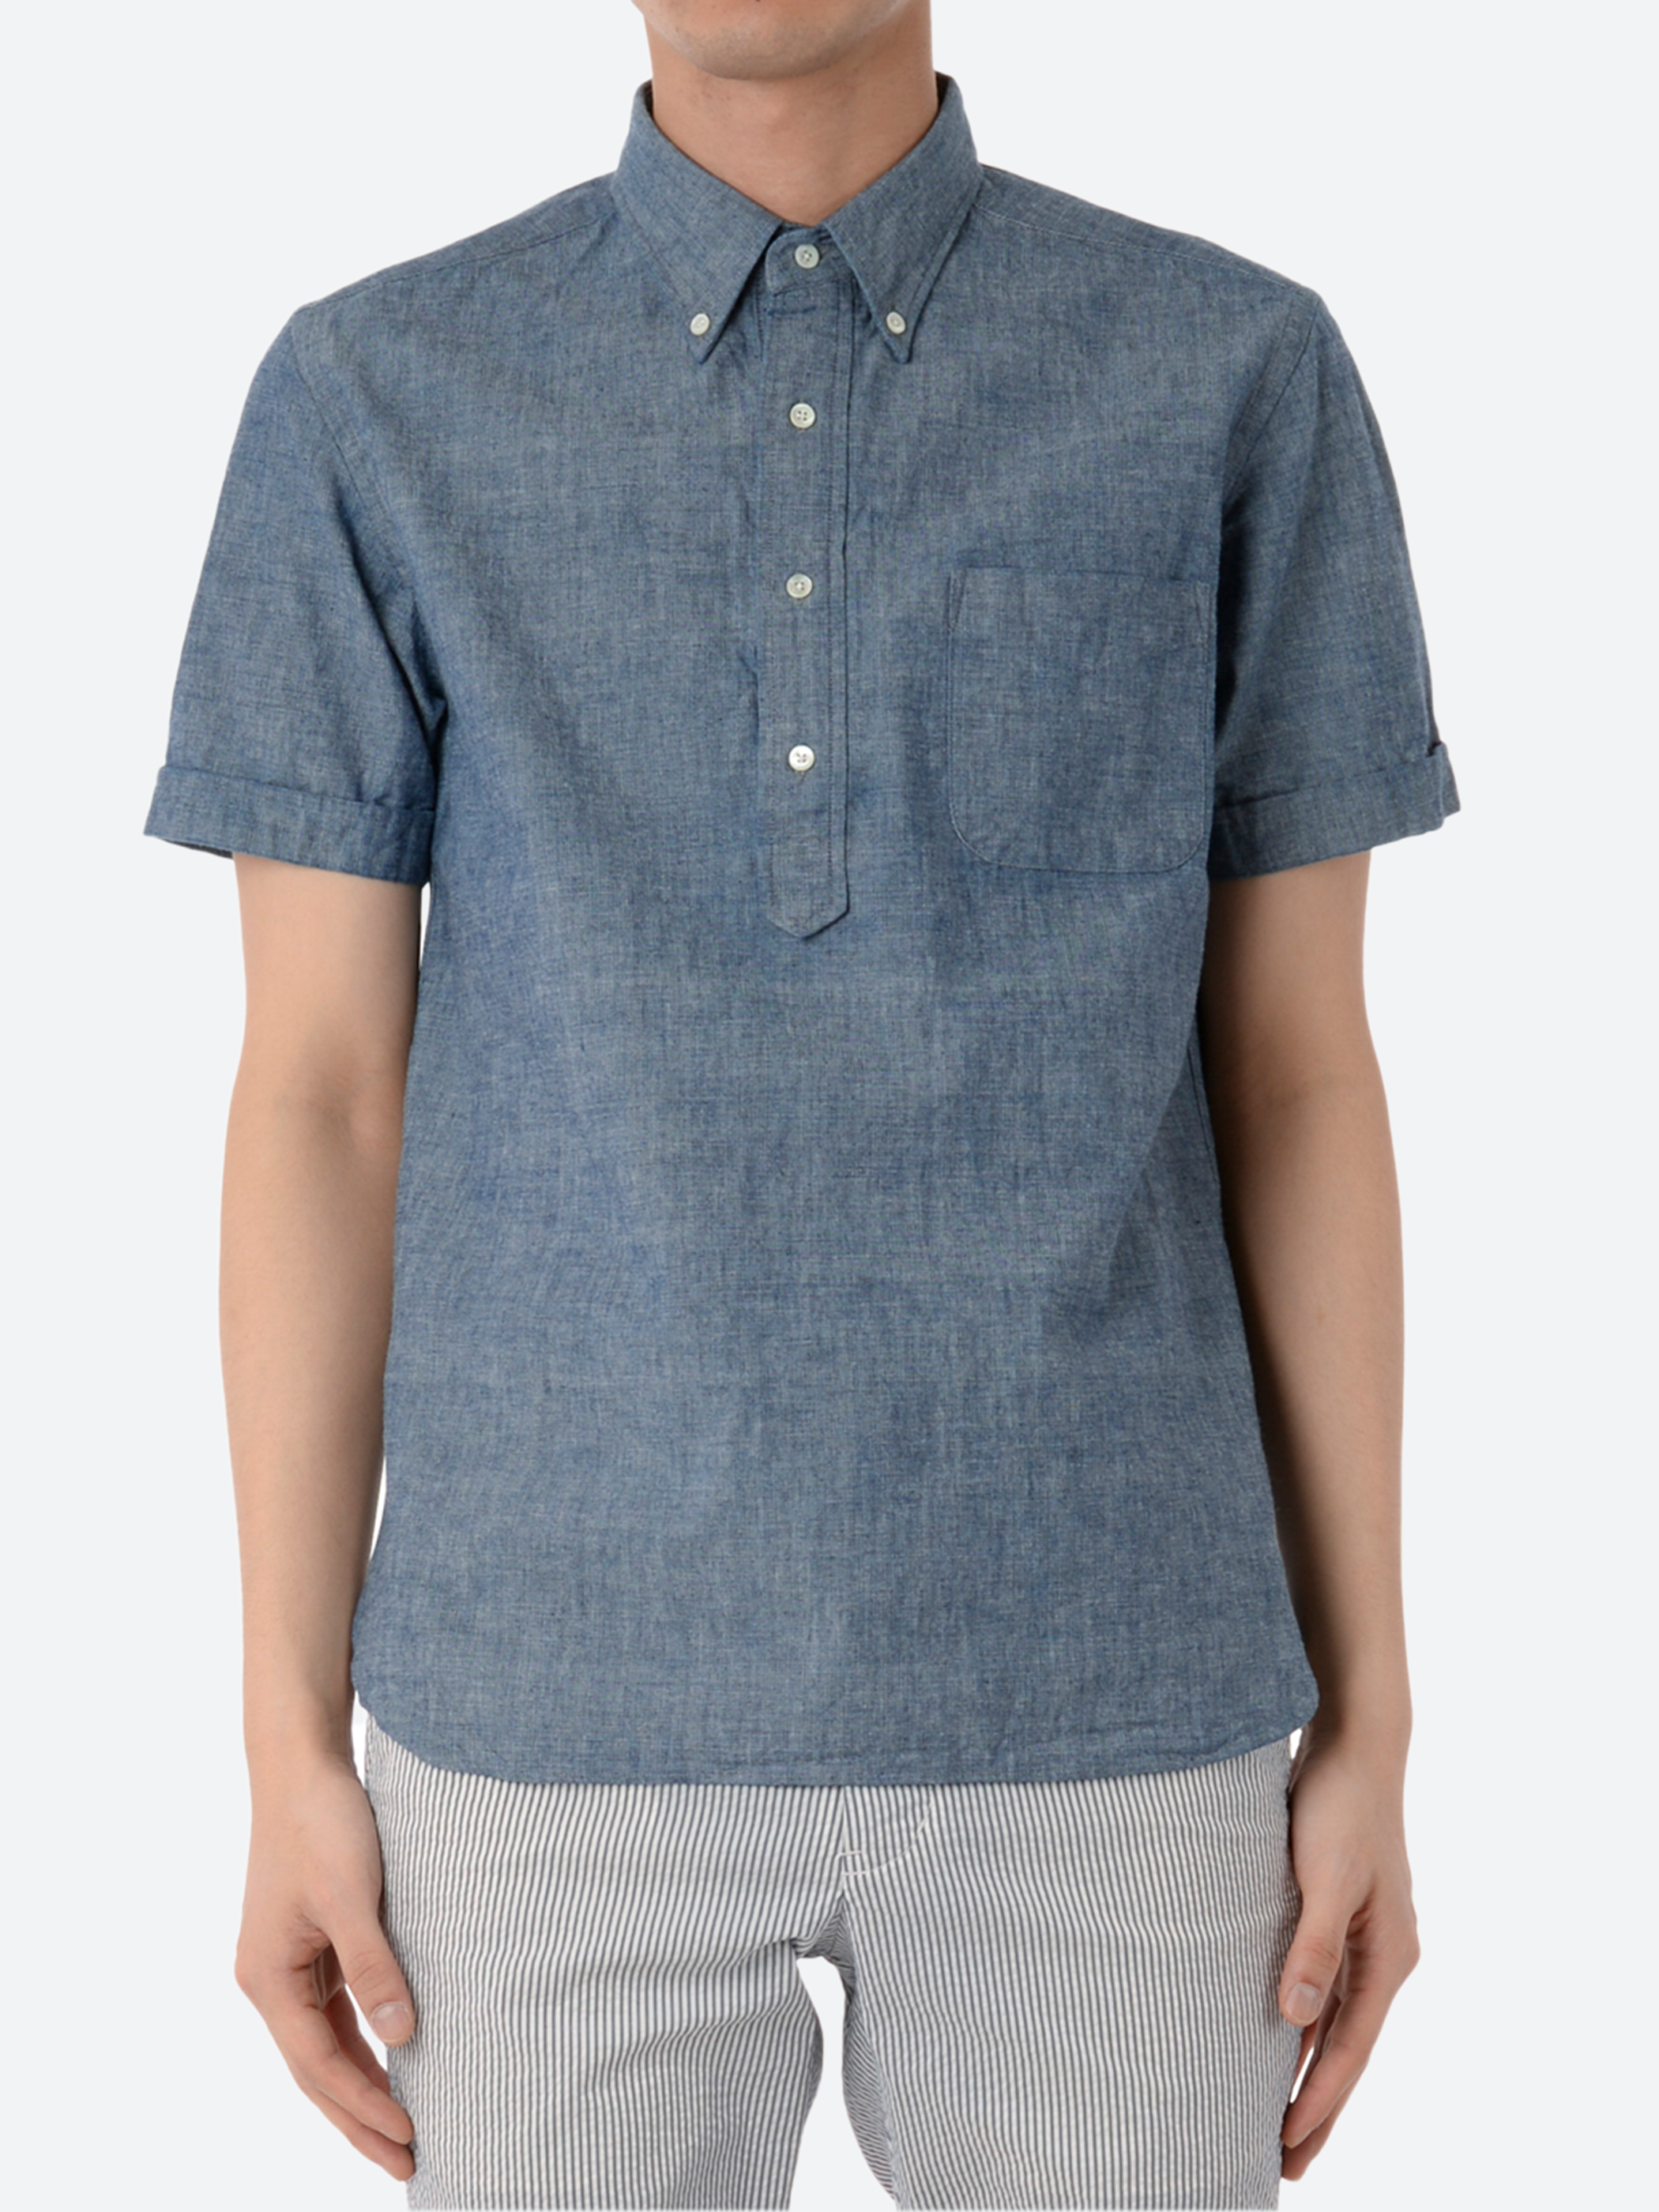 S/S Popover Chambray Shirt